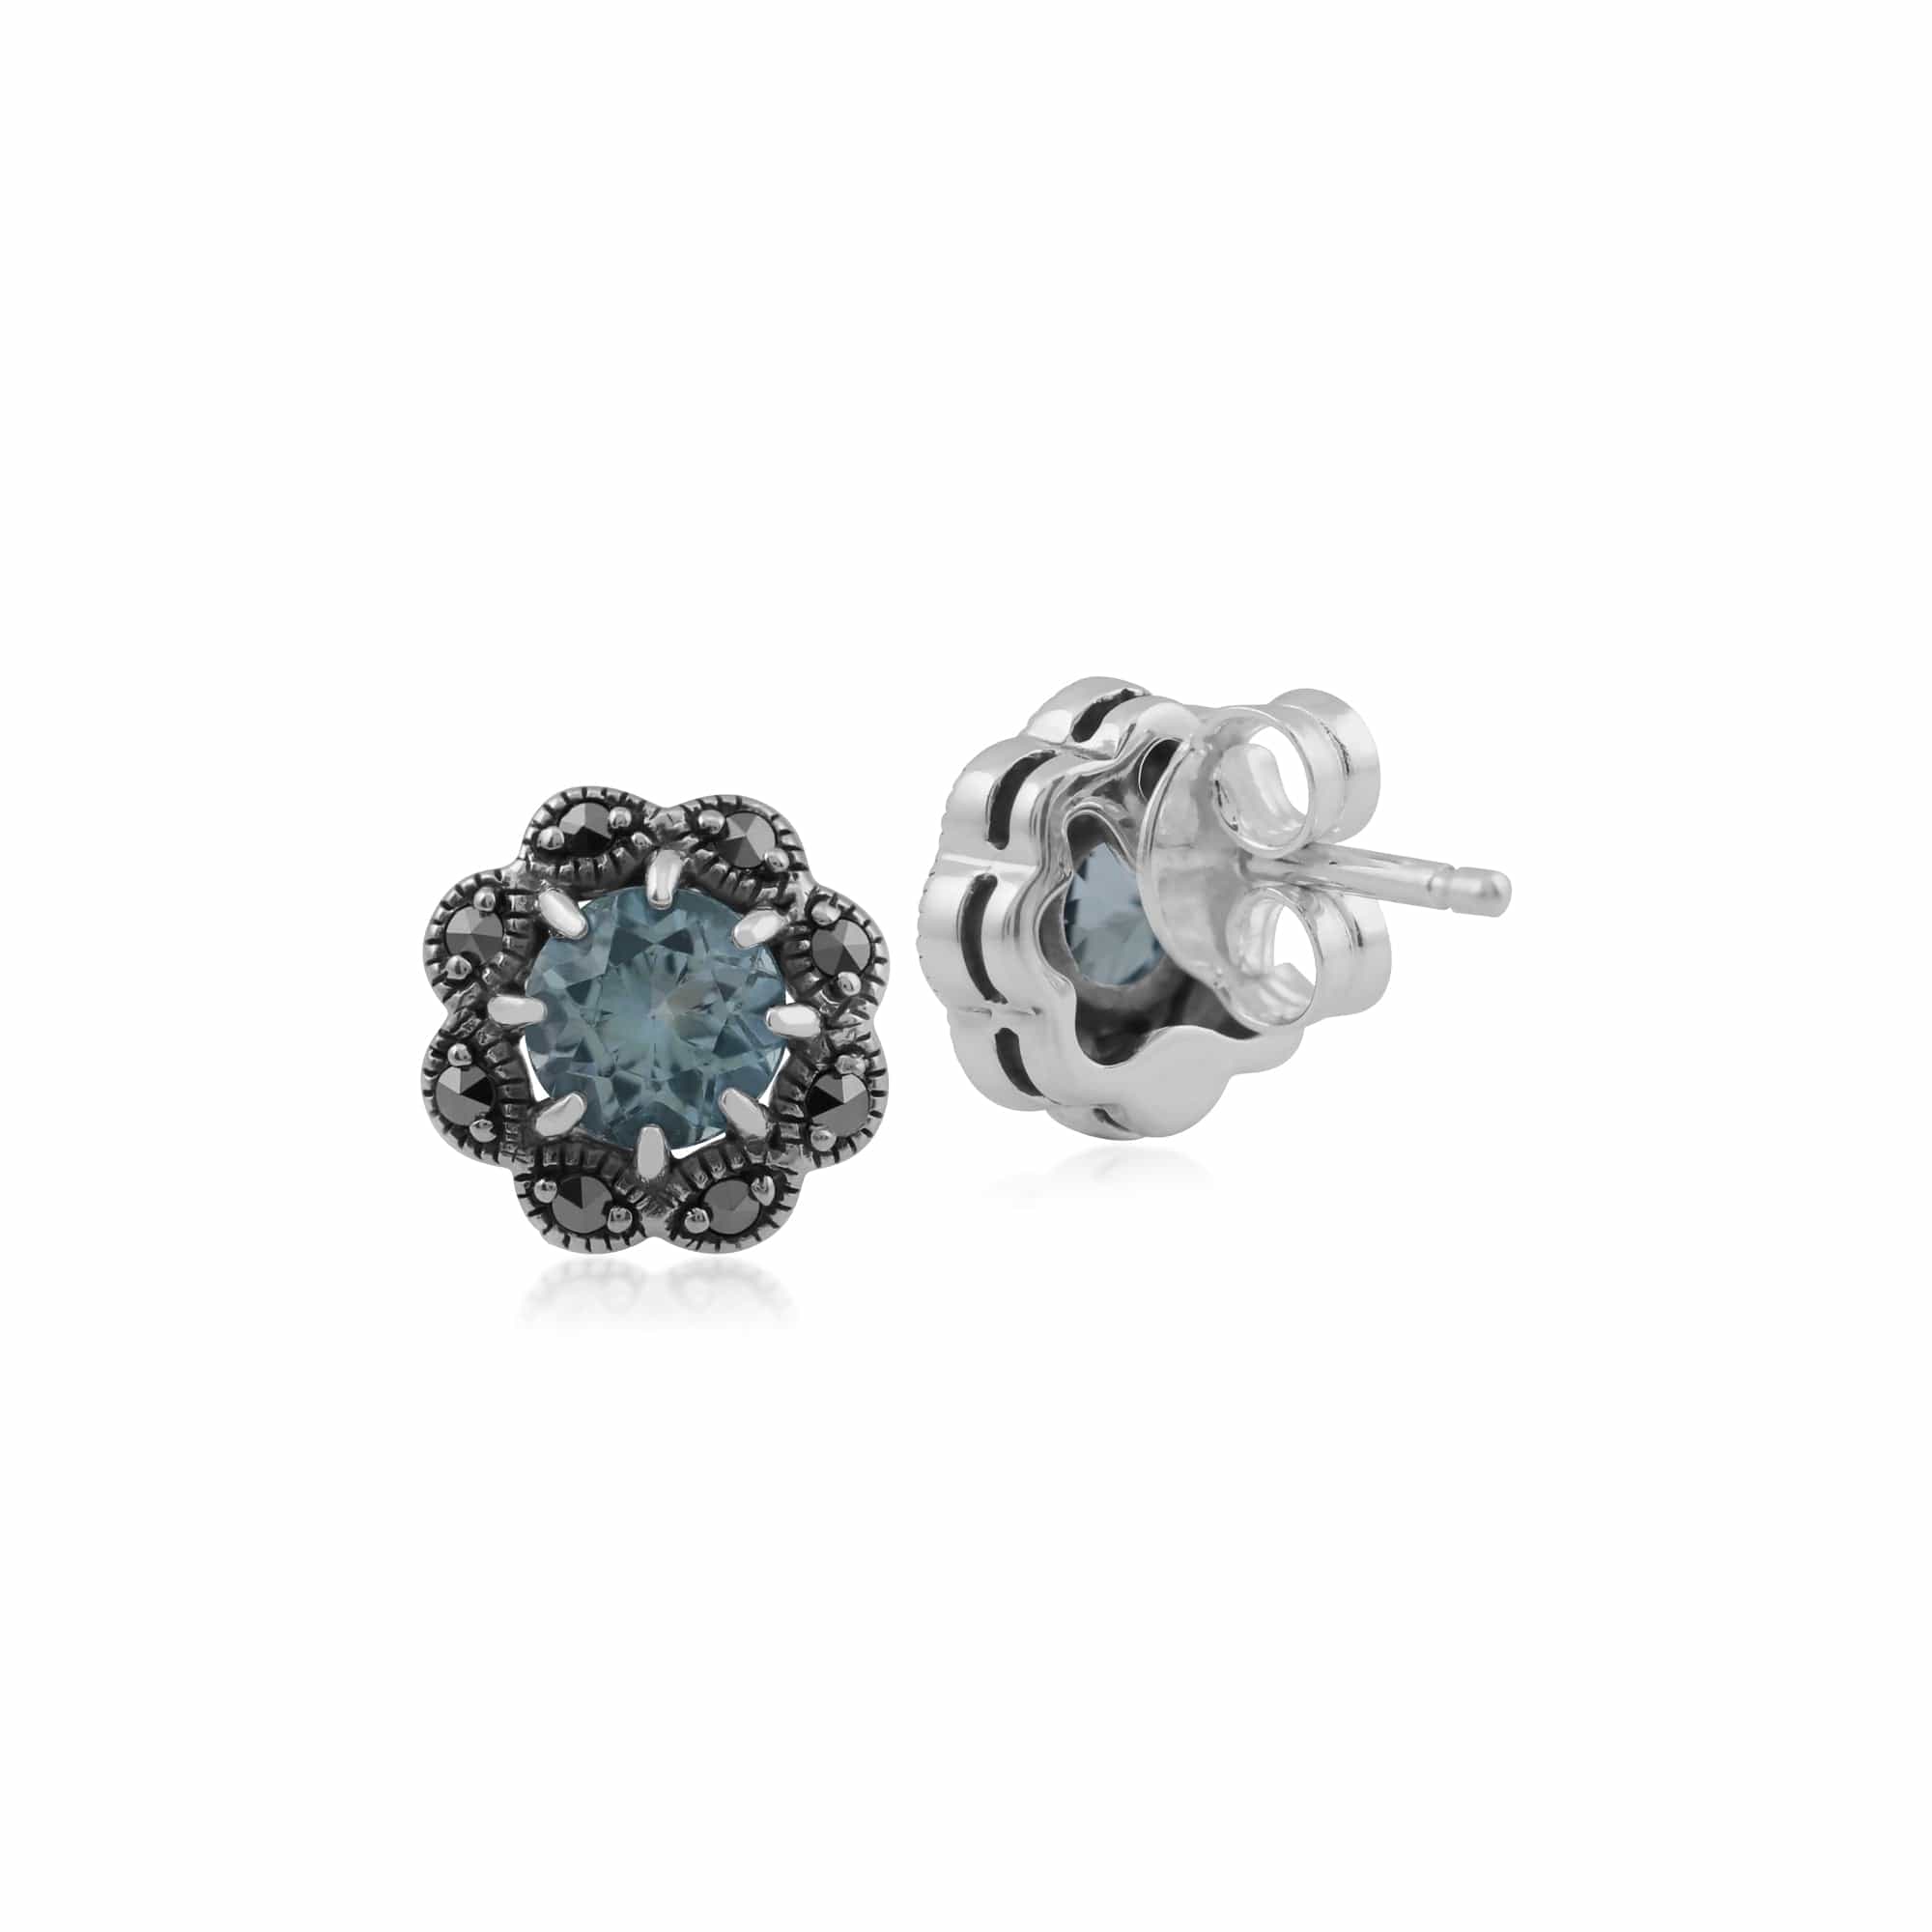 214E731504925 Floral Round Blue Topaz & Marcasite Cluster Stud Earrings in 925 Sterling Silver 2